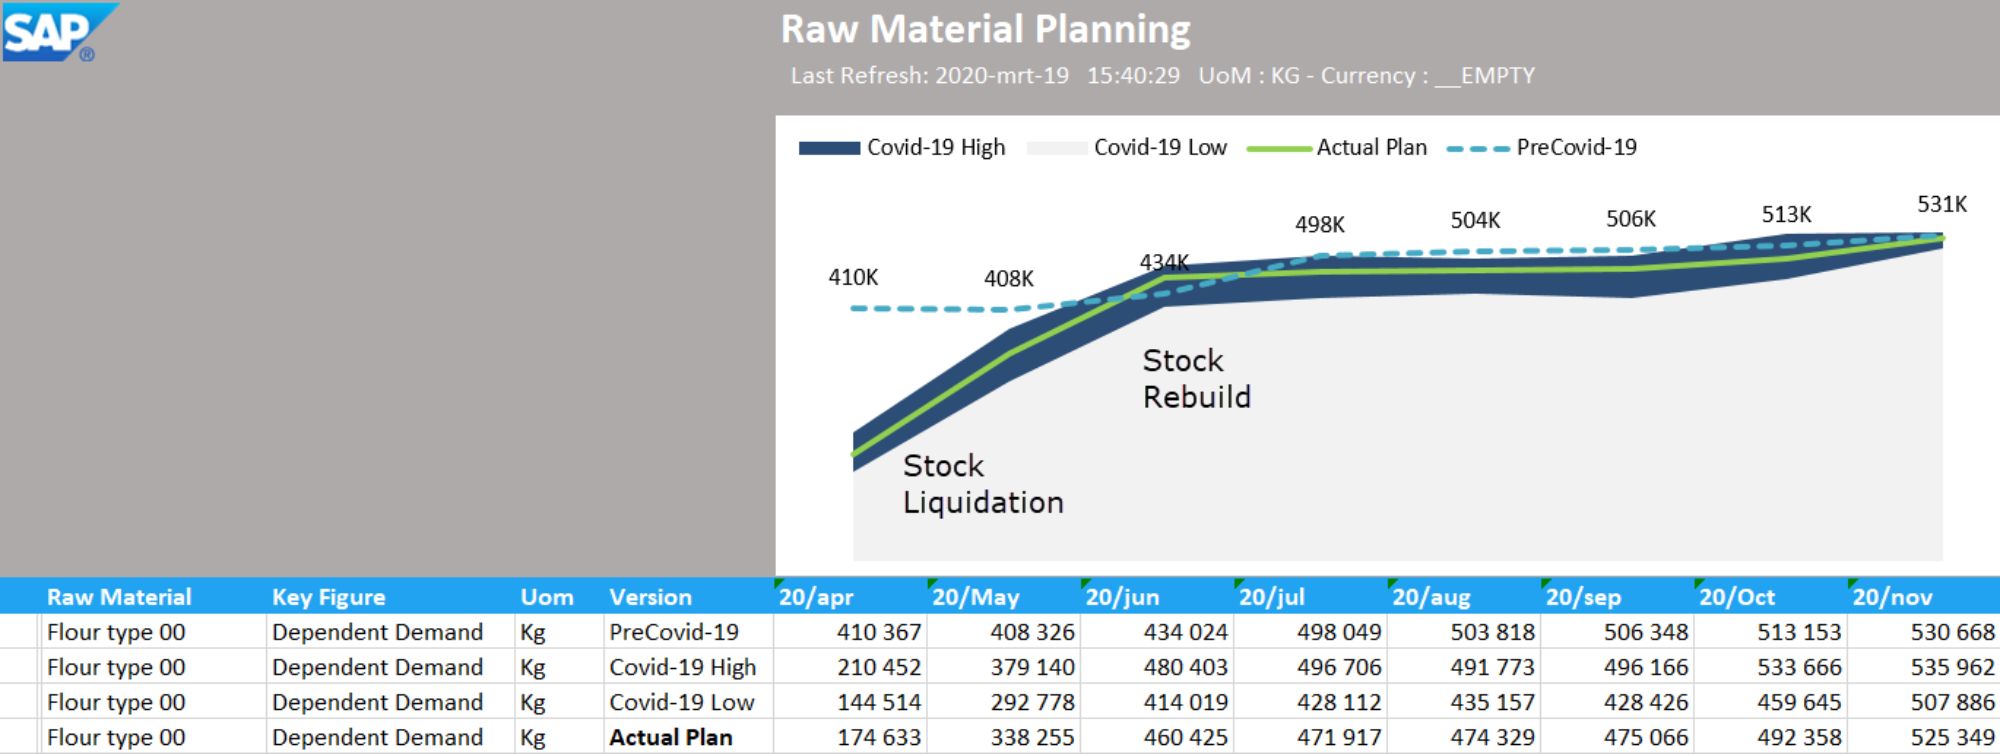 Raw Material Planning by the data provided